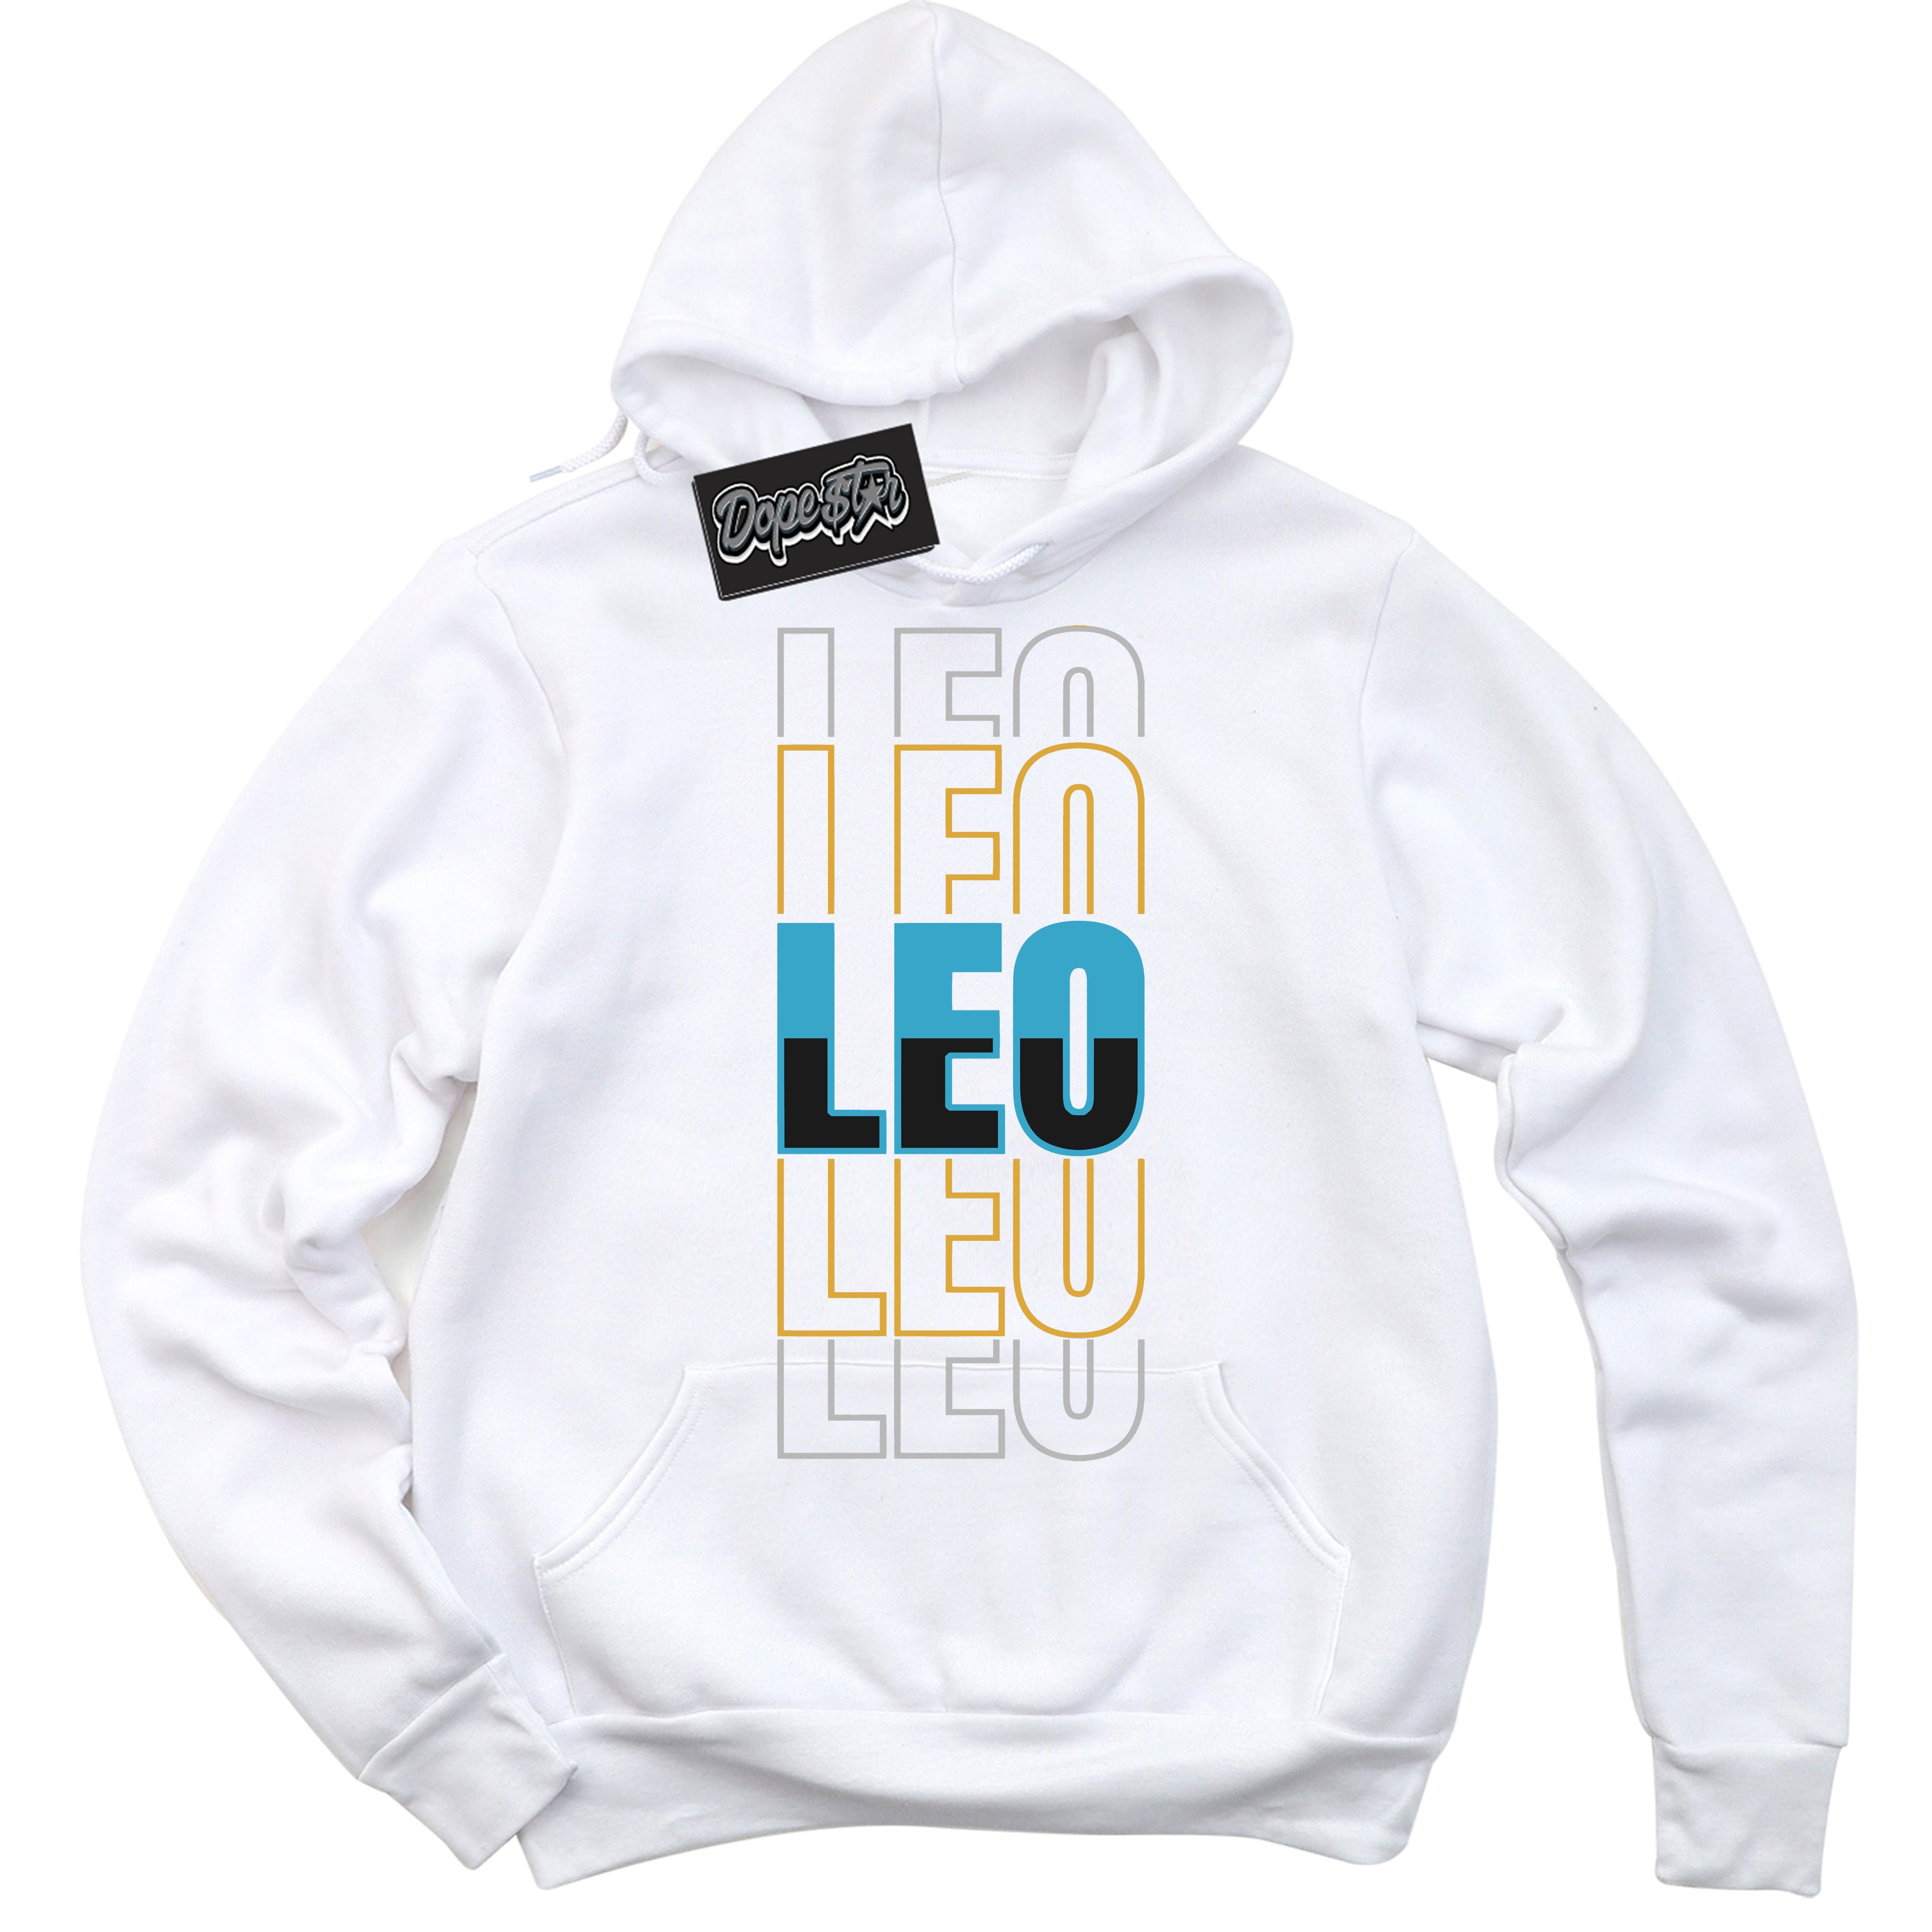 Cool White Hoodie with “ Leo ”  design that Perfectly Matches Aqua 5s Sneakers.